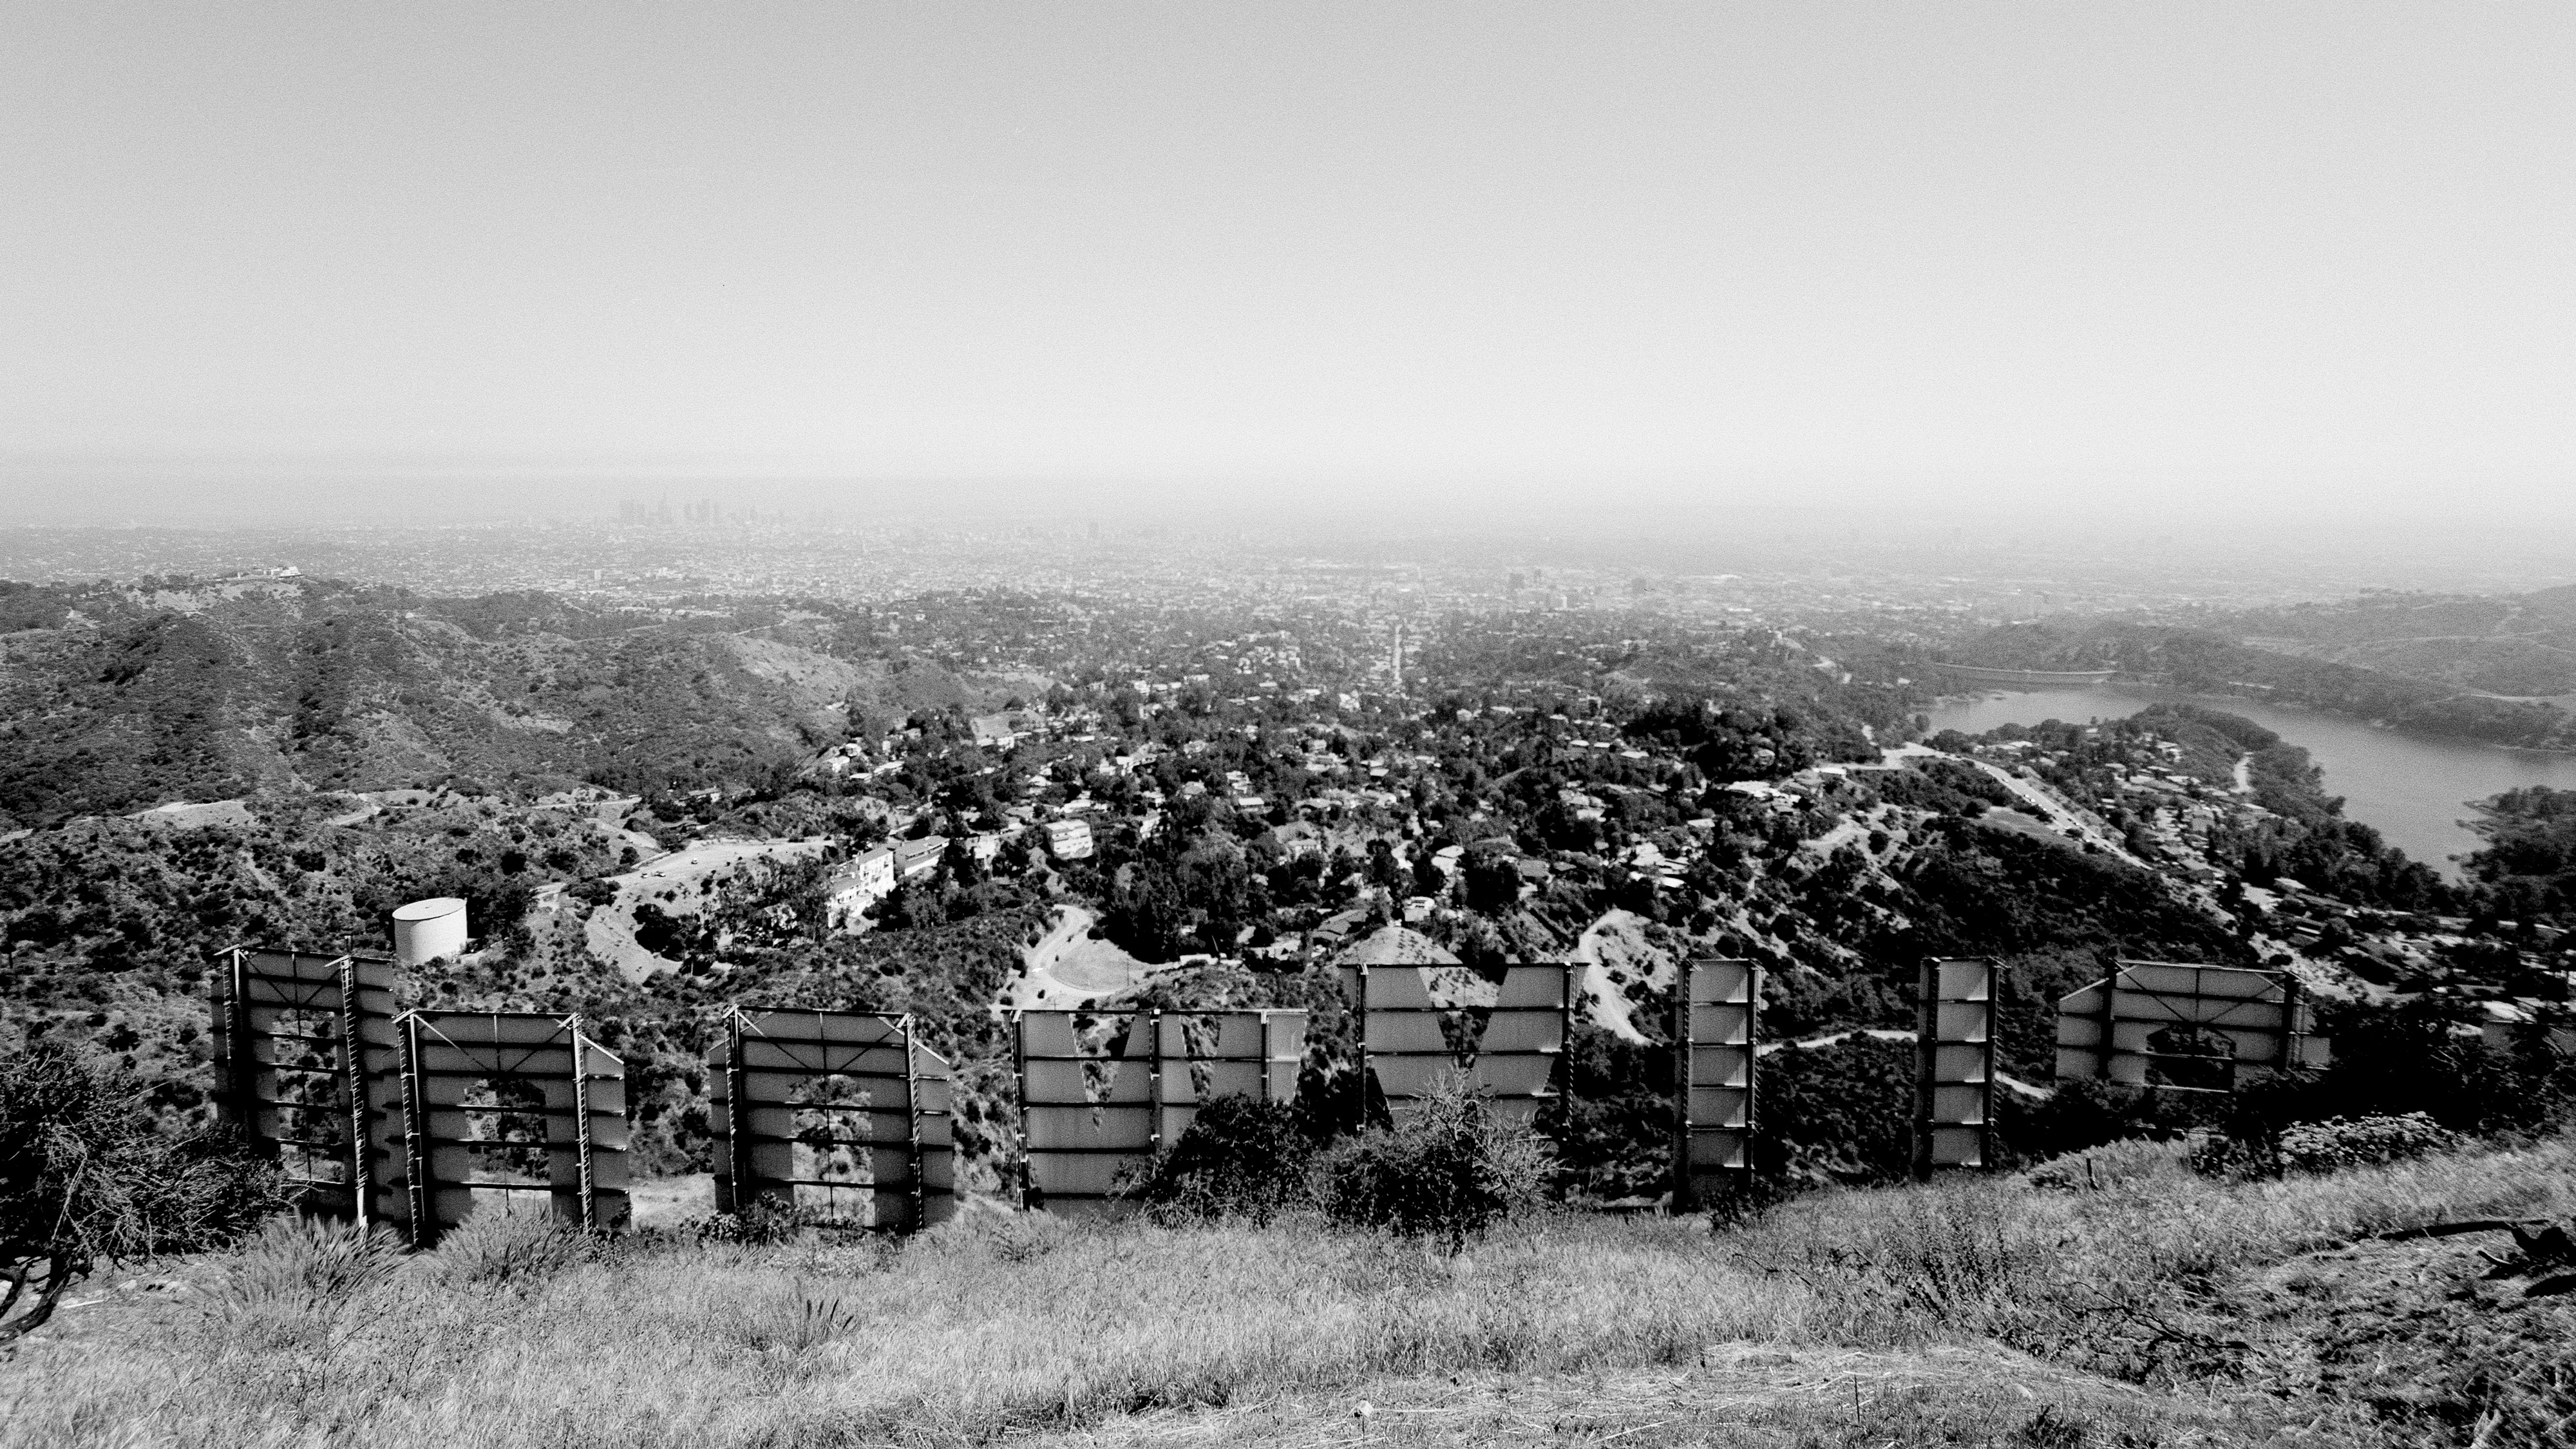 The Hollywood sign seen from behind in black and white